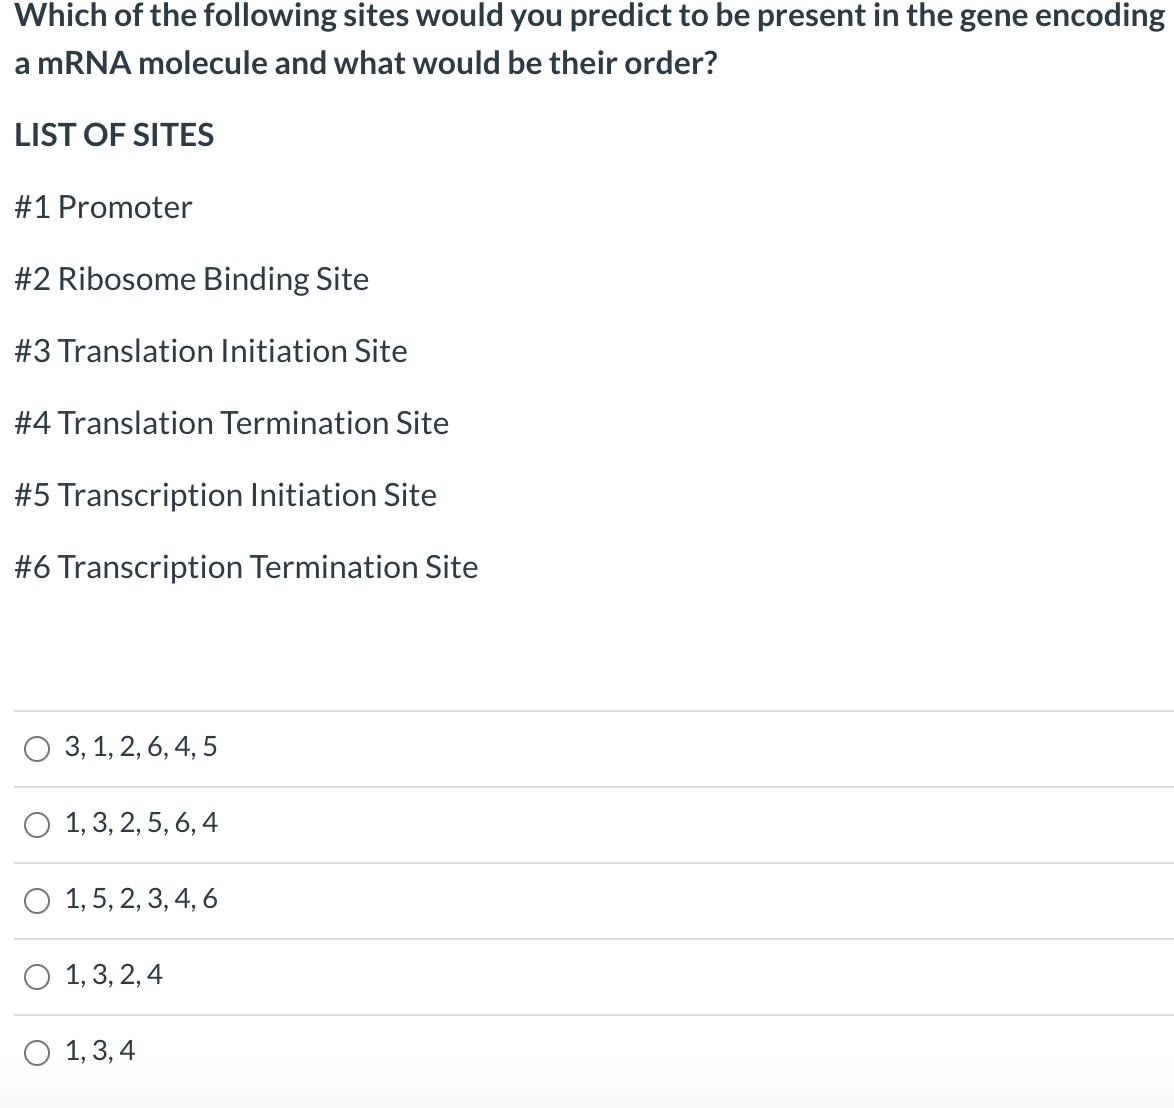 Which of the following sites would you predict to be present in the gene encoding
a MRNA molecule and what would be their order?
LIST OF SITES
#1 Promoter
#2 Ribosome Binding Site
#3 Translation Initiation Site
#4 Translation Termination Site
#5 Transcription Initiation Site
#6 Transcription Termination Site
O 3, 1, 2, 6, 4, 5
O 1, 3, 2, 5, 6, 4
О 1,5, 2, 3,4, 6
О 1,3, 2,4
О 1,3,4
